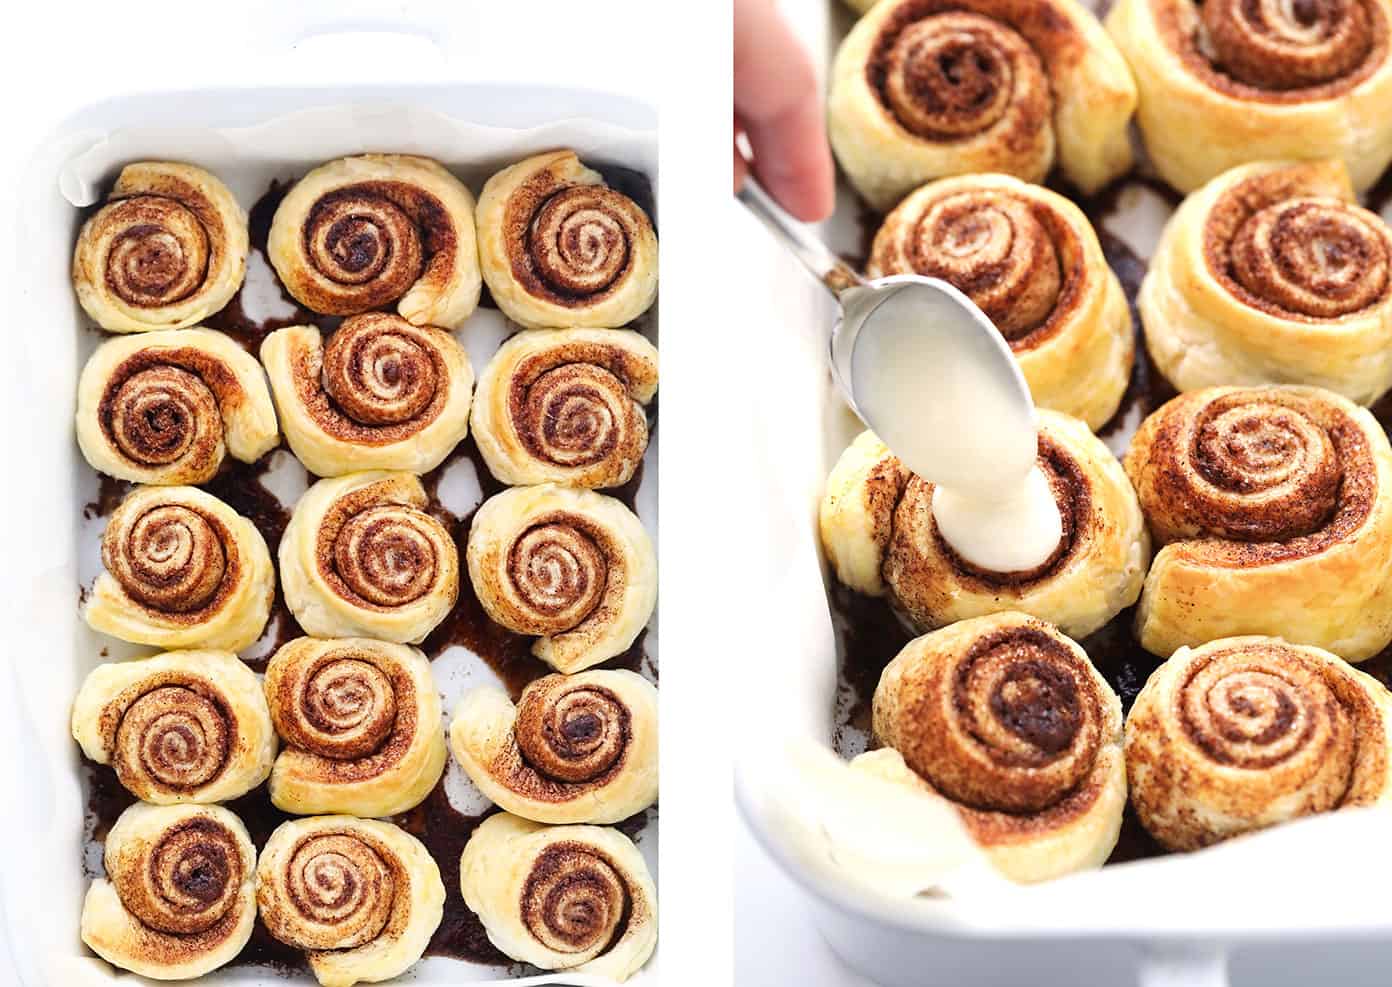 Spreading the icing on puff pastry cinnamon buns